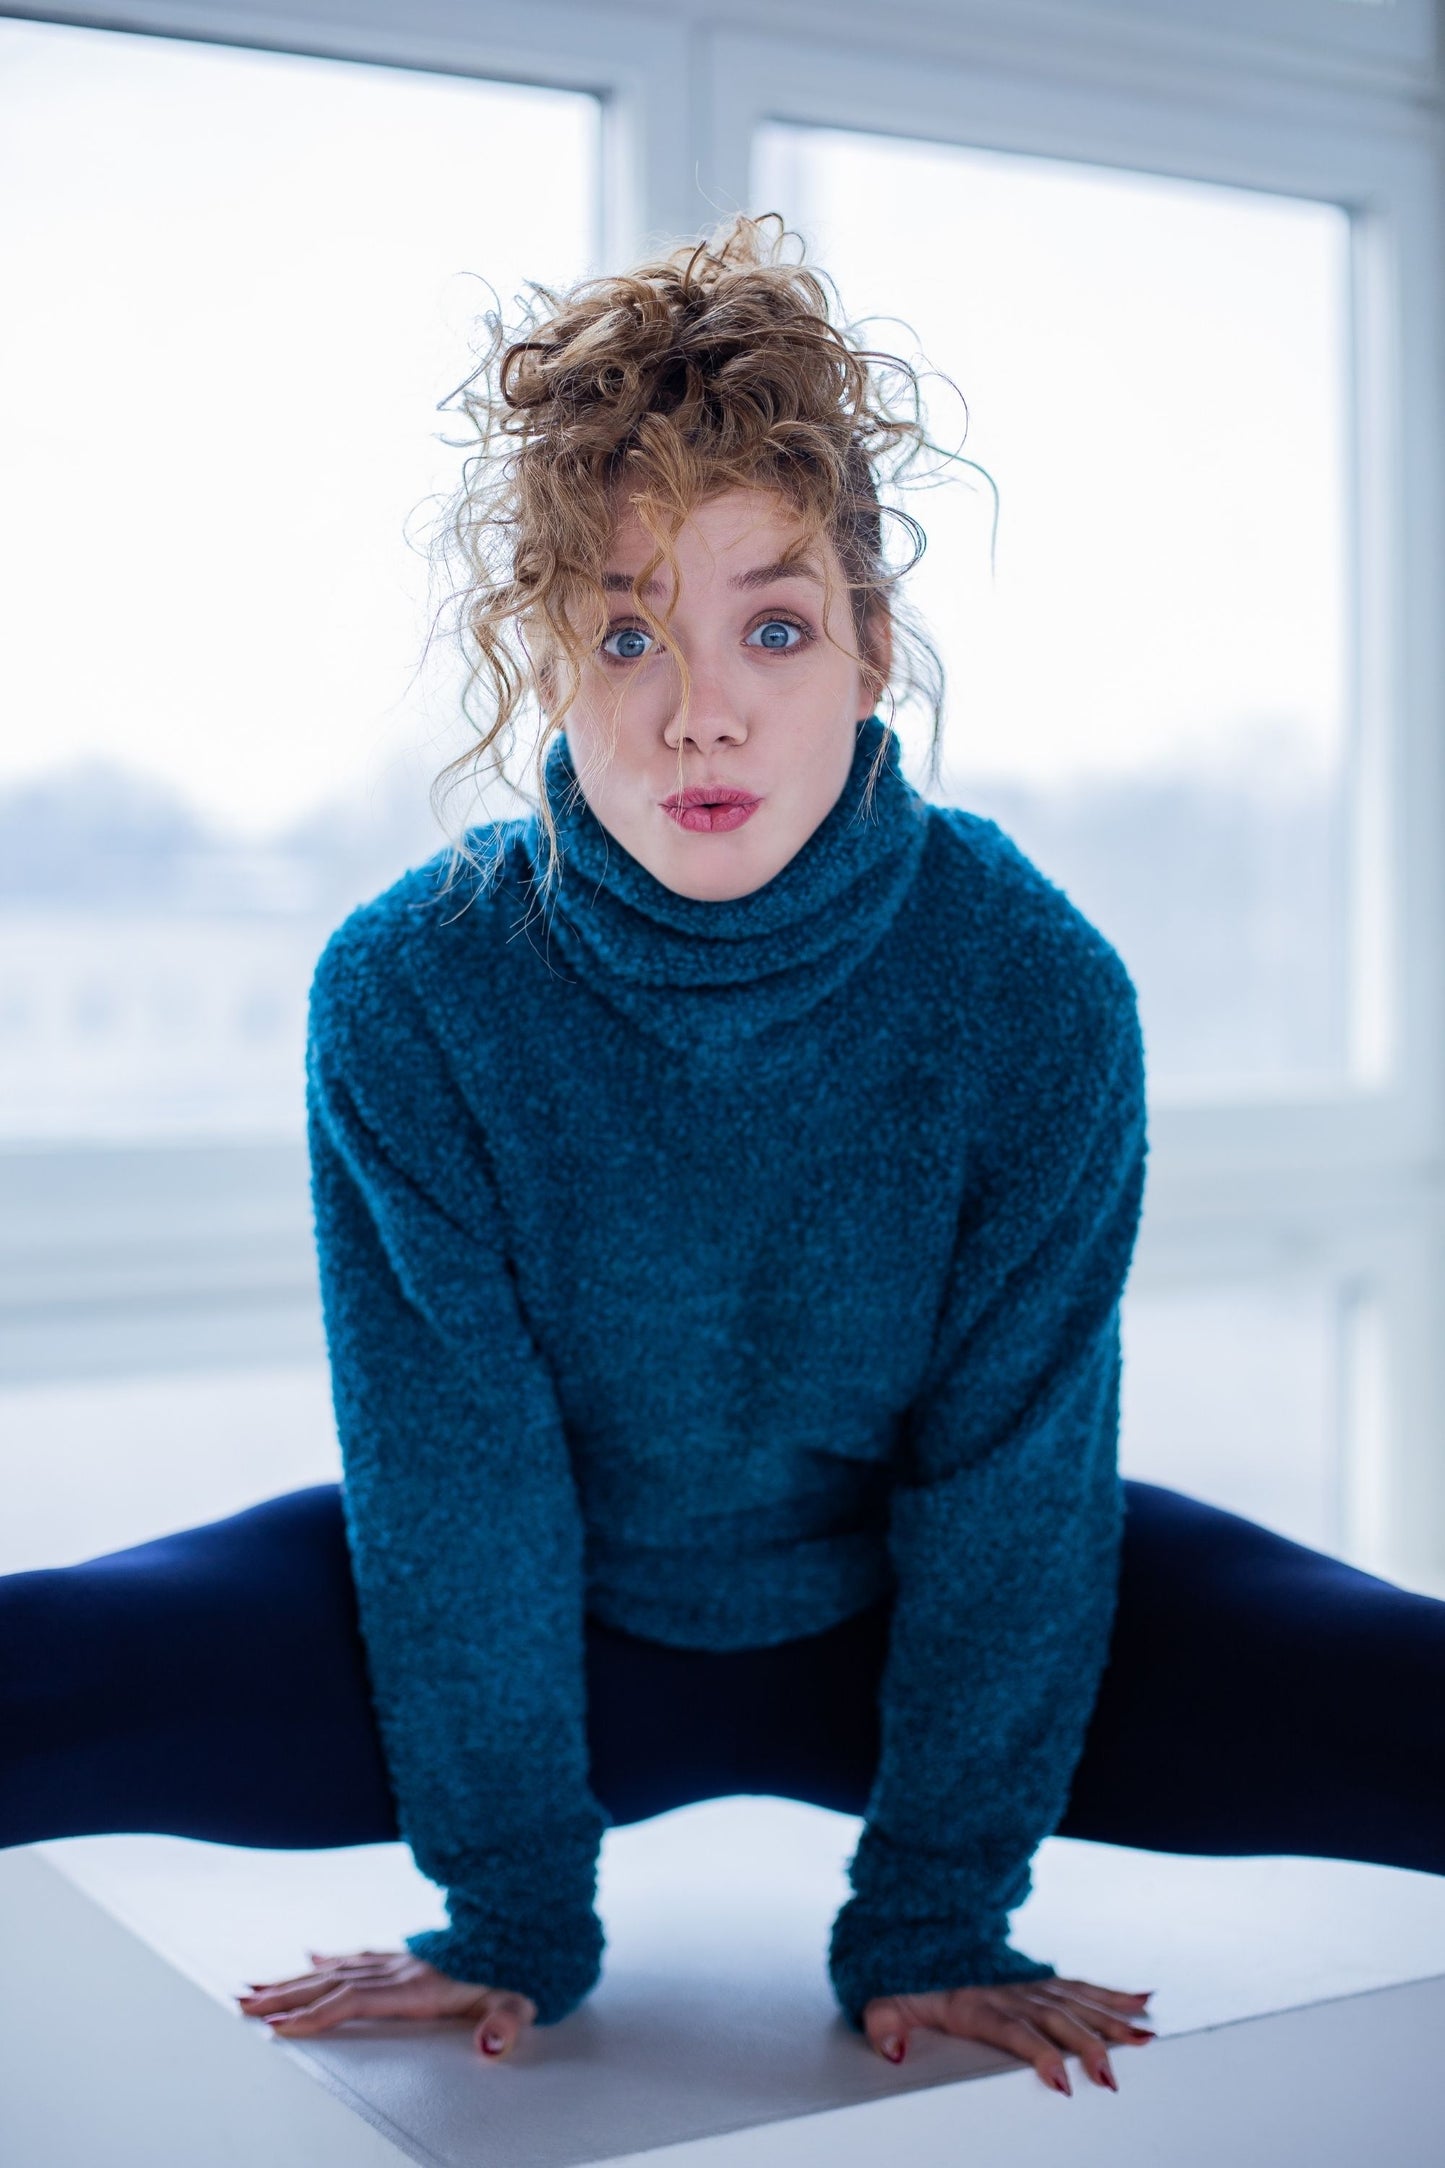 Blue sweater made of wool fabric